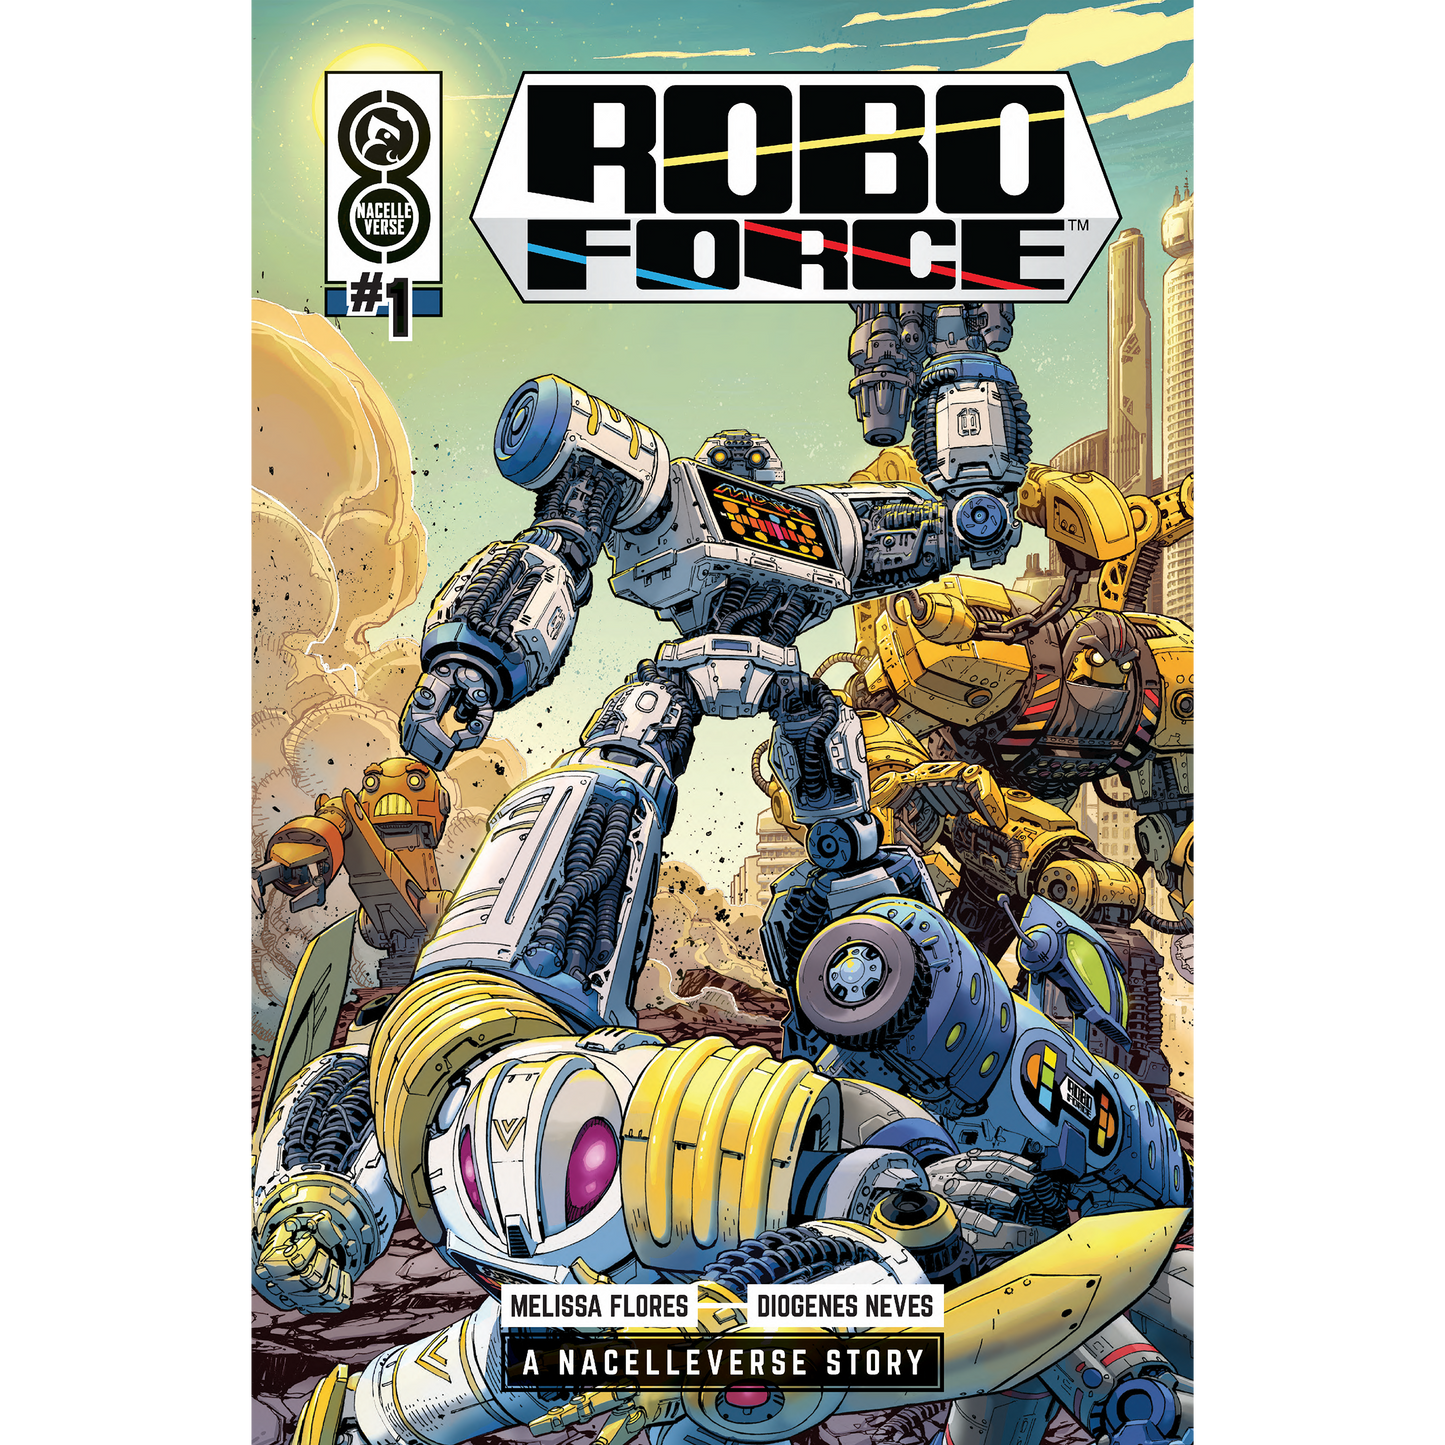 RoboForce #1 Comic Book - Cover A by Dustin Weaver